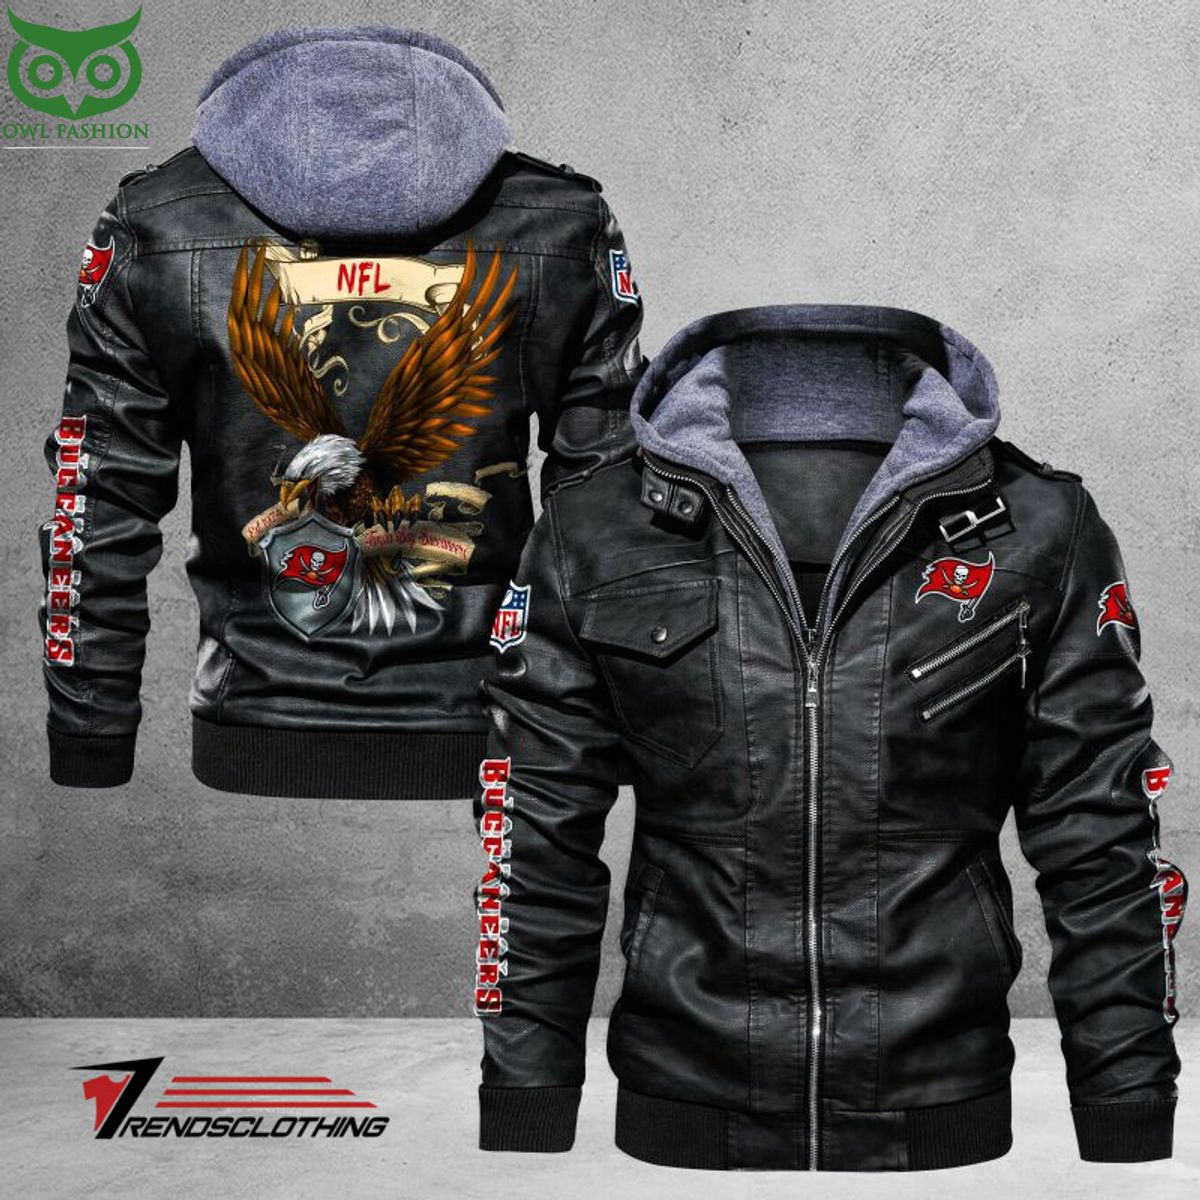 Tampa Bay Buccaneers Trending 2D Leather Jacket - Owl Fashion Shop